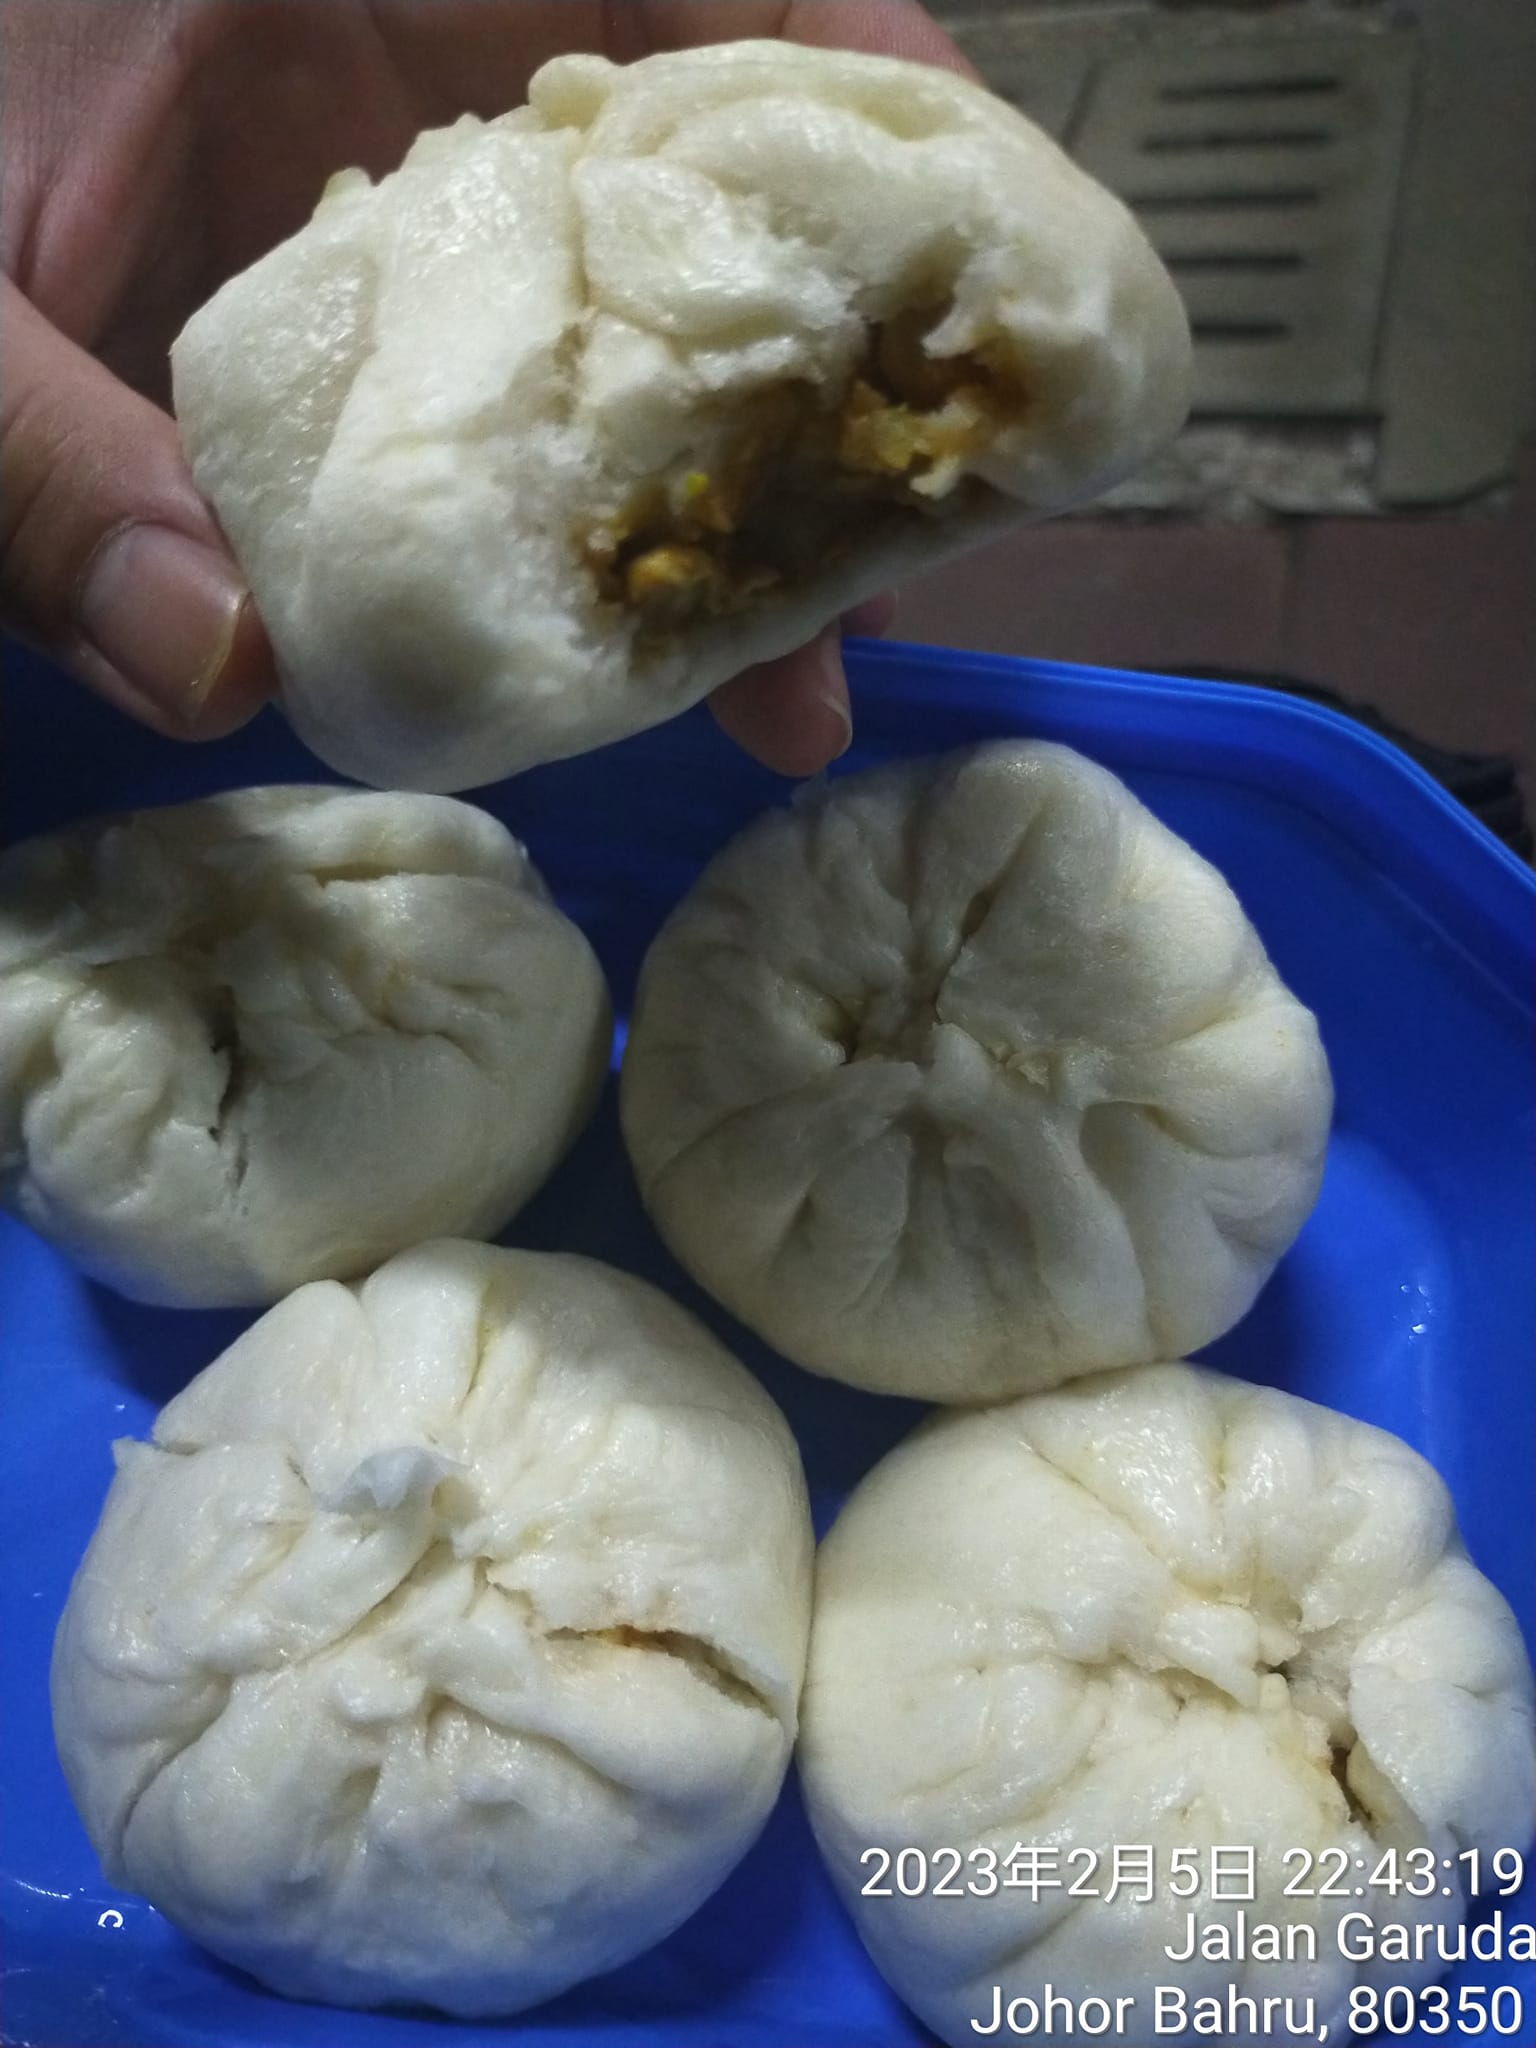 Man at jb checkpoint finishes homemade buns made by daughter, worried s'pore customs would refuse entry